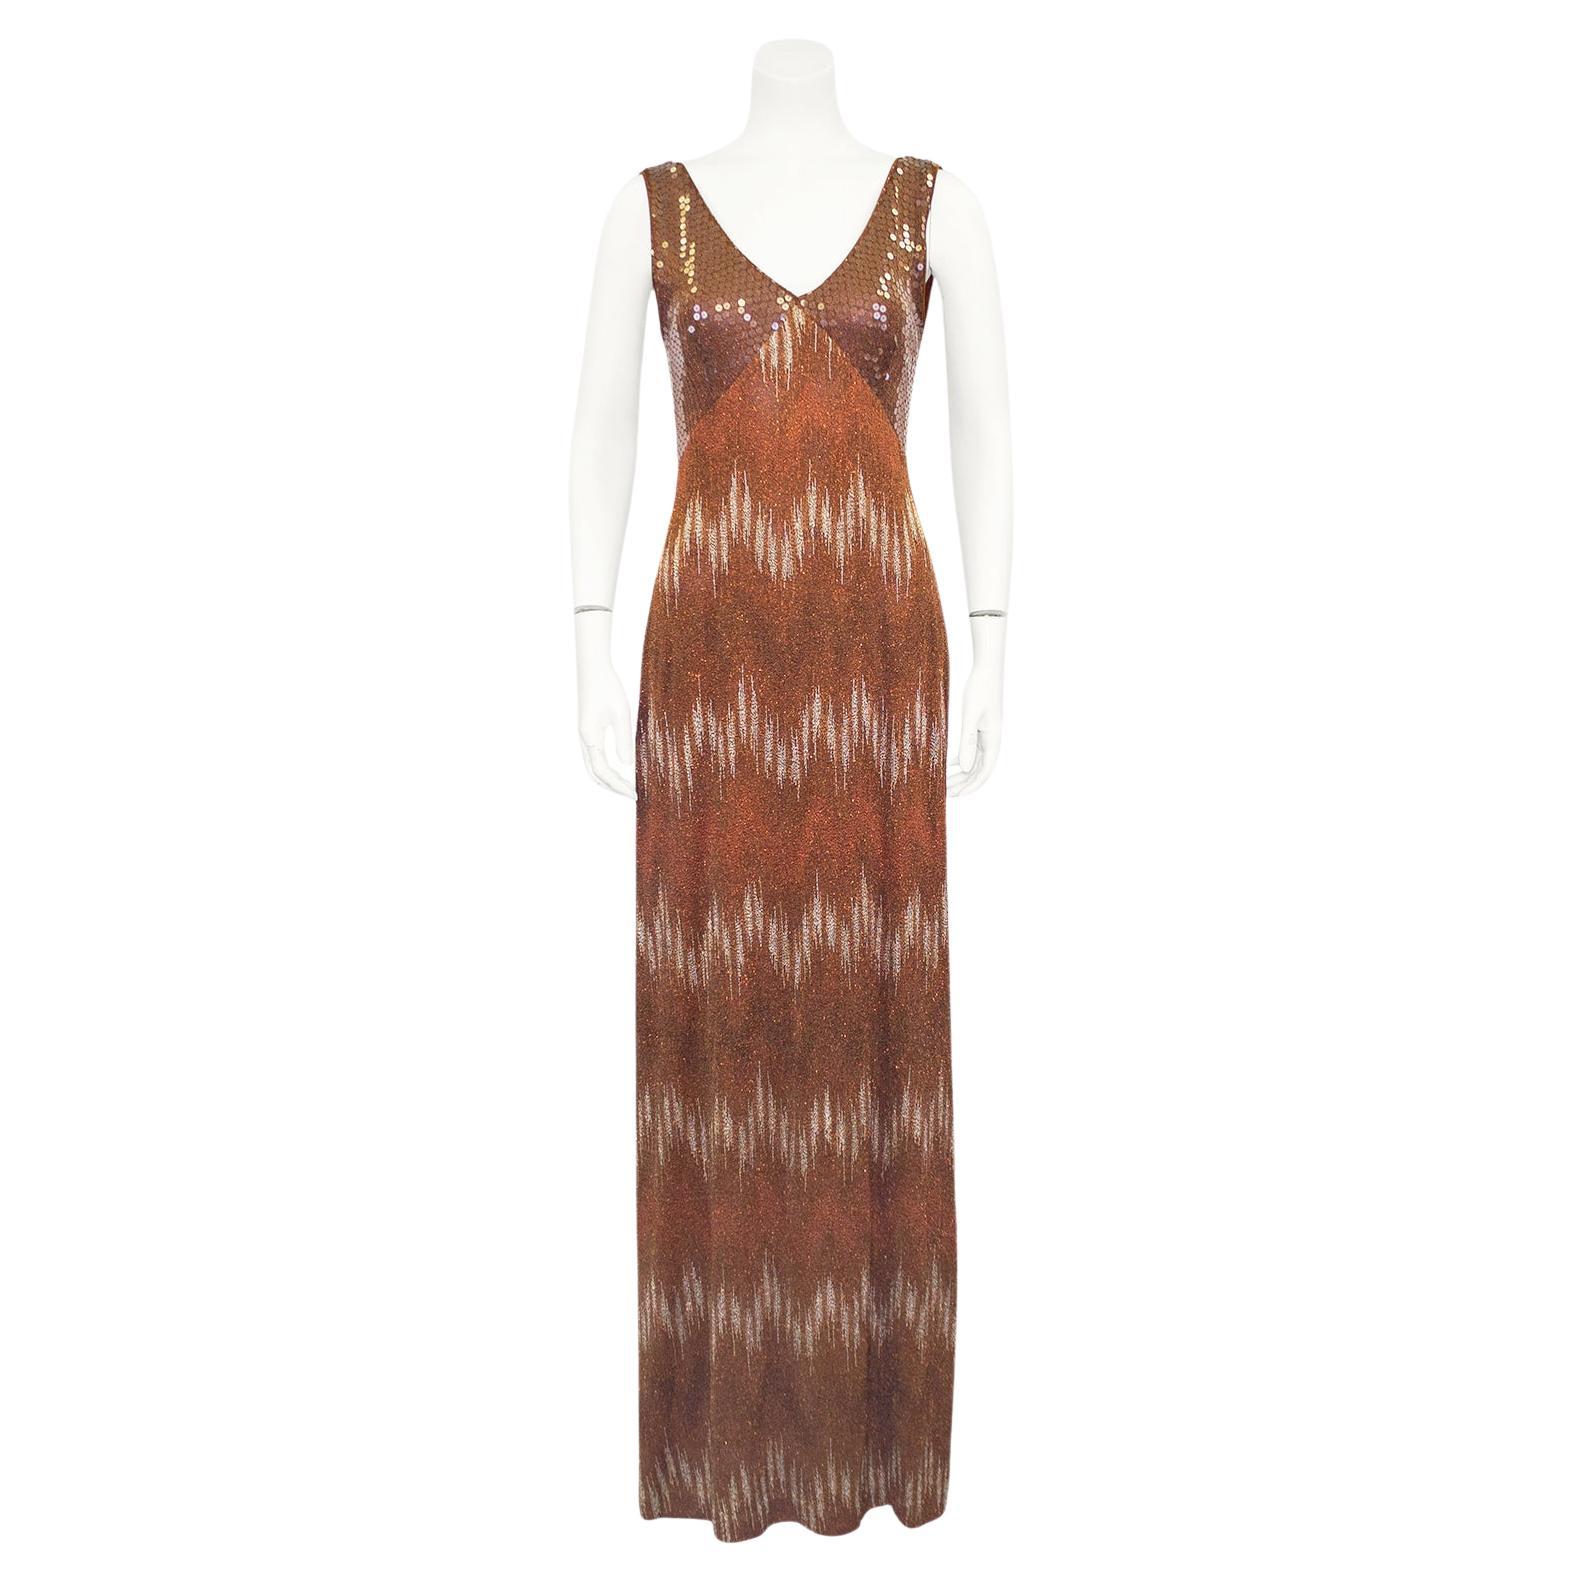 Stunning Missoni bronze knit gown and shawl ensemble from the 1990s. The gown is sleeveless with a v neckline. The bust is fully embellished with iridescent sequins that look brown with the fabric underneath showing through. These sequins reflect